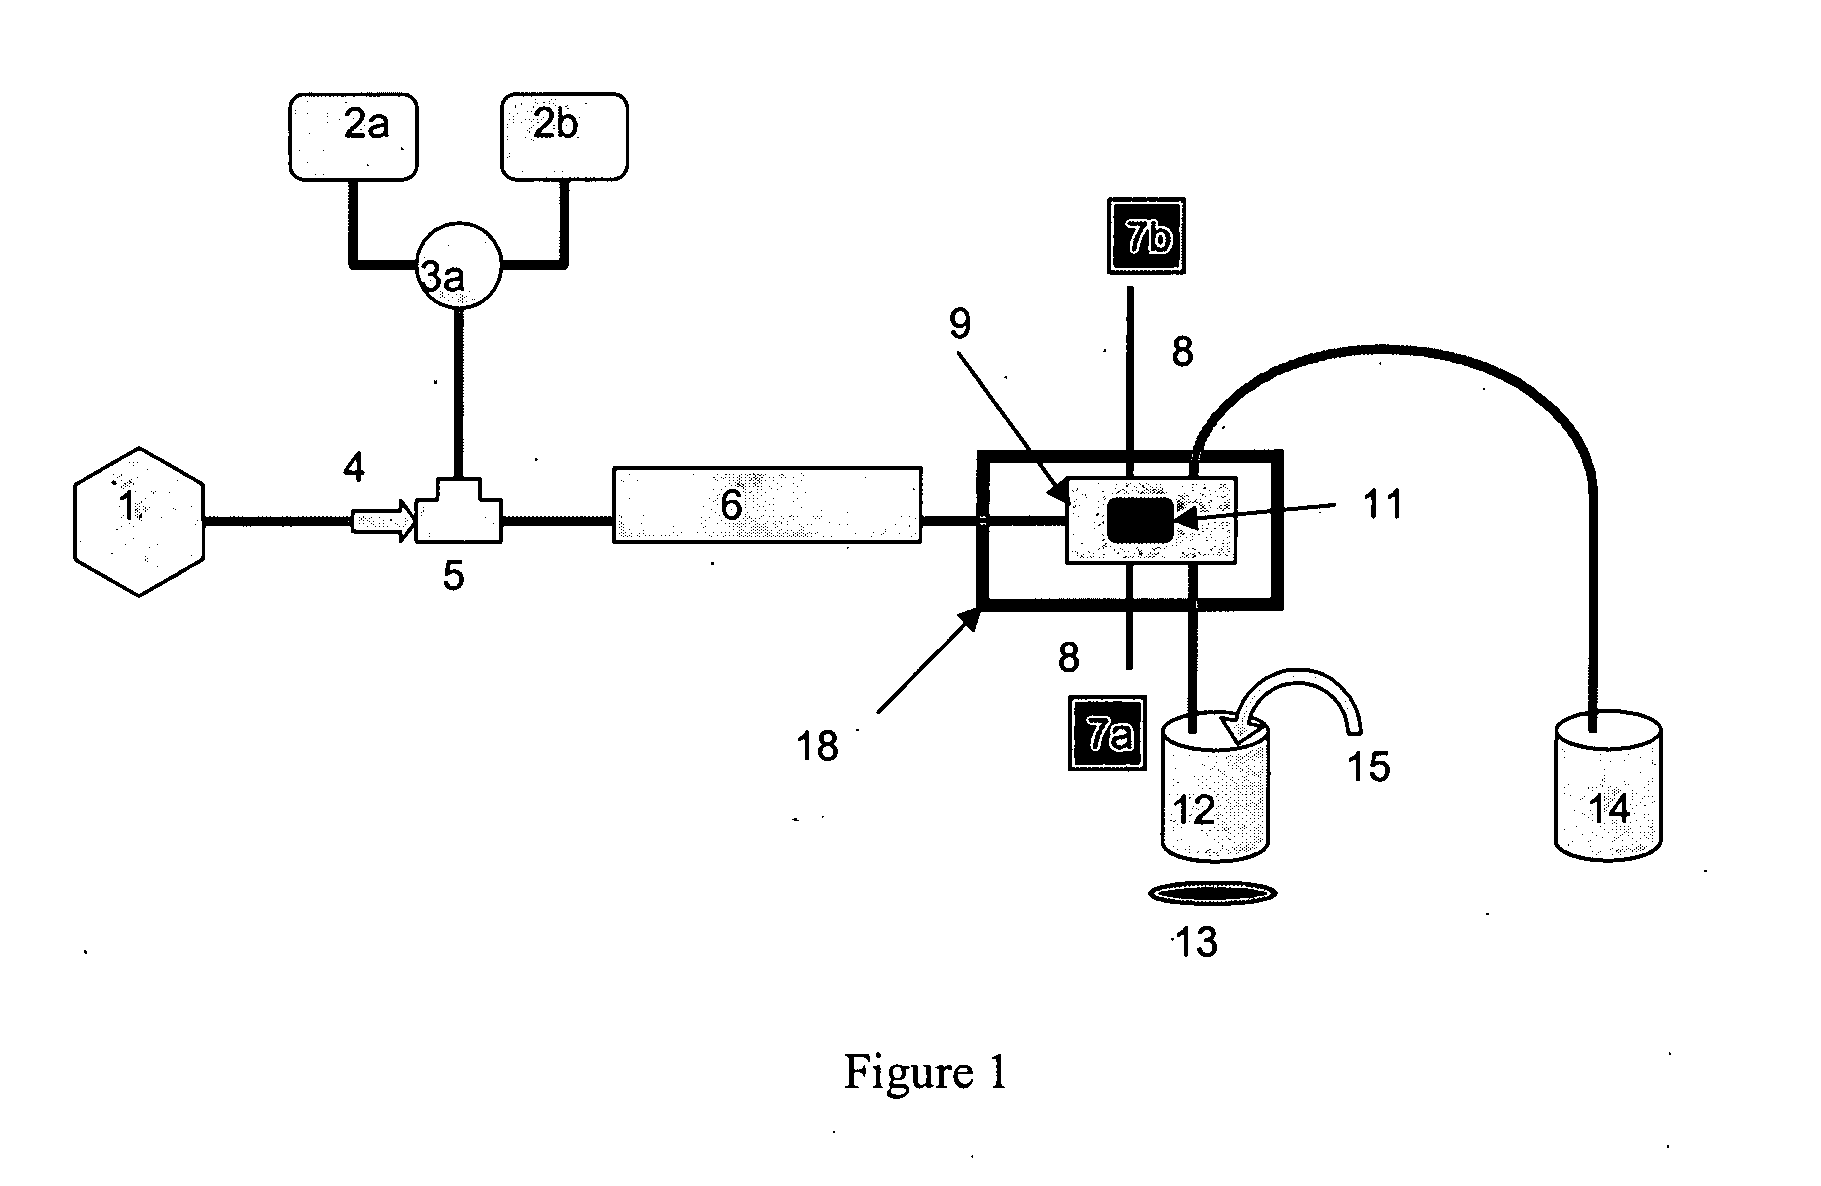 System for purification and analysis of radiochemical products yielded by microfluidic synthesis devices